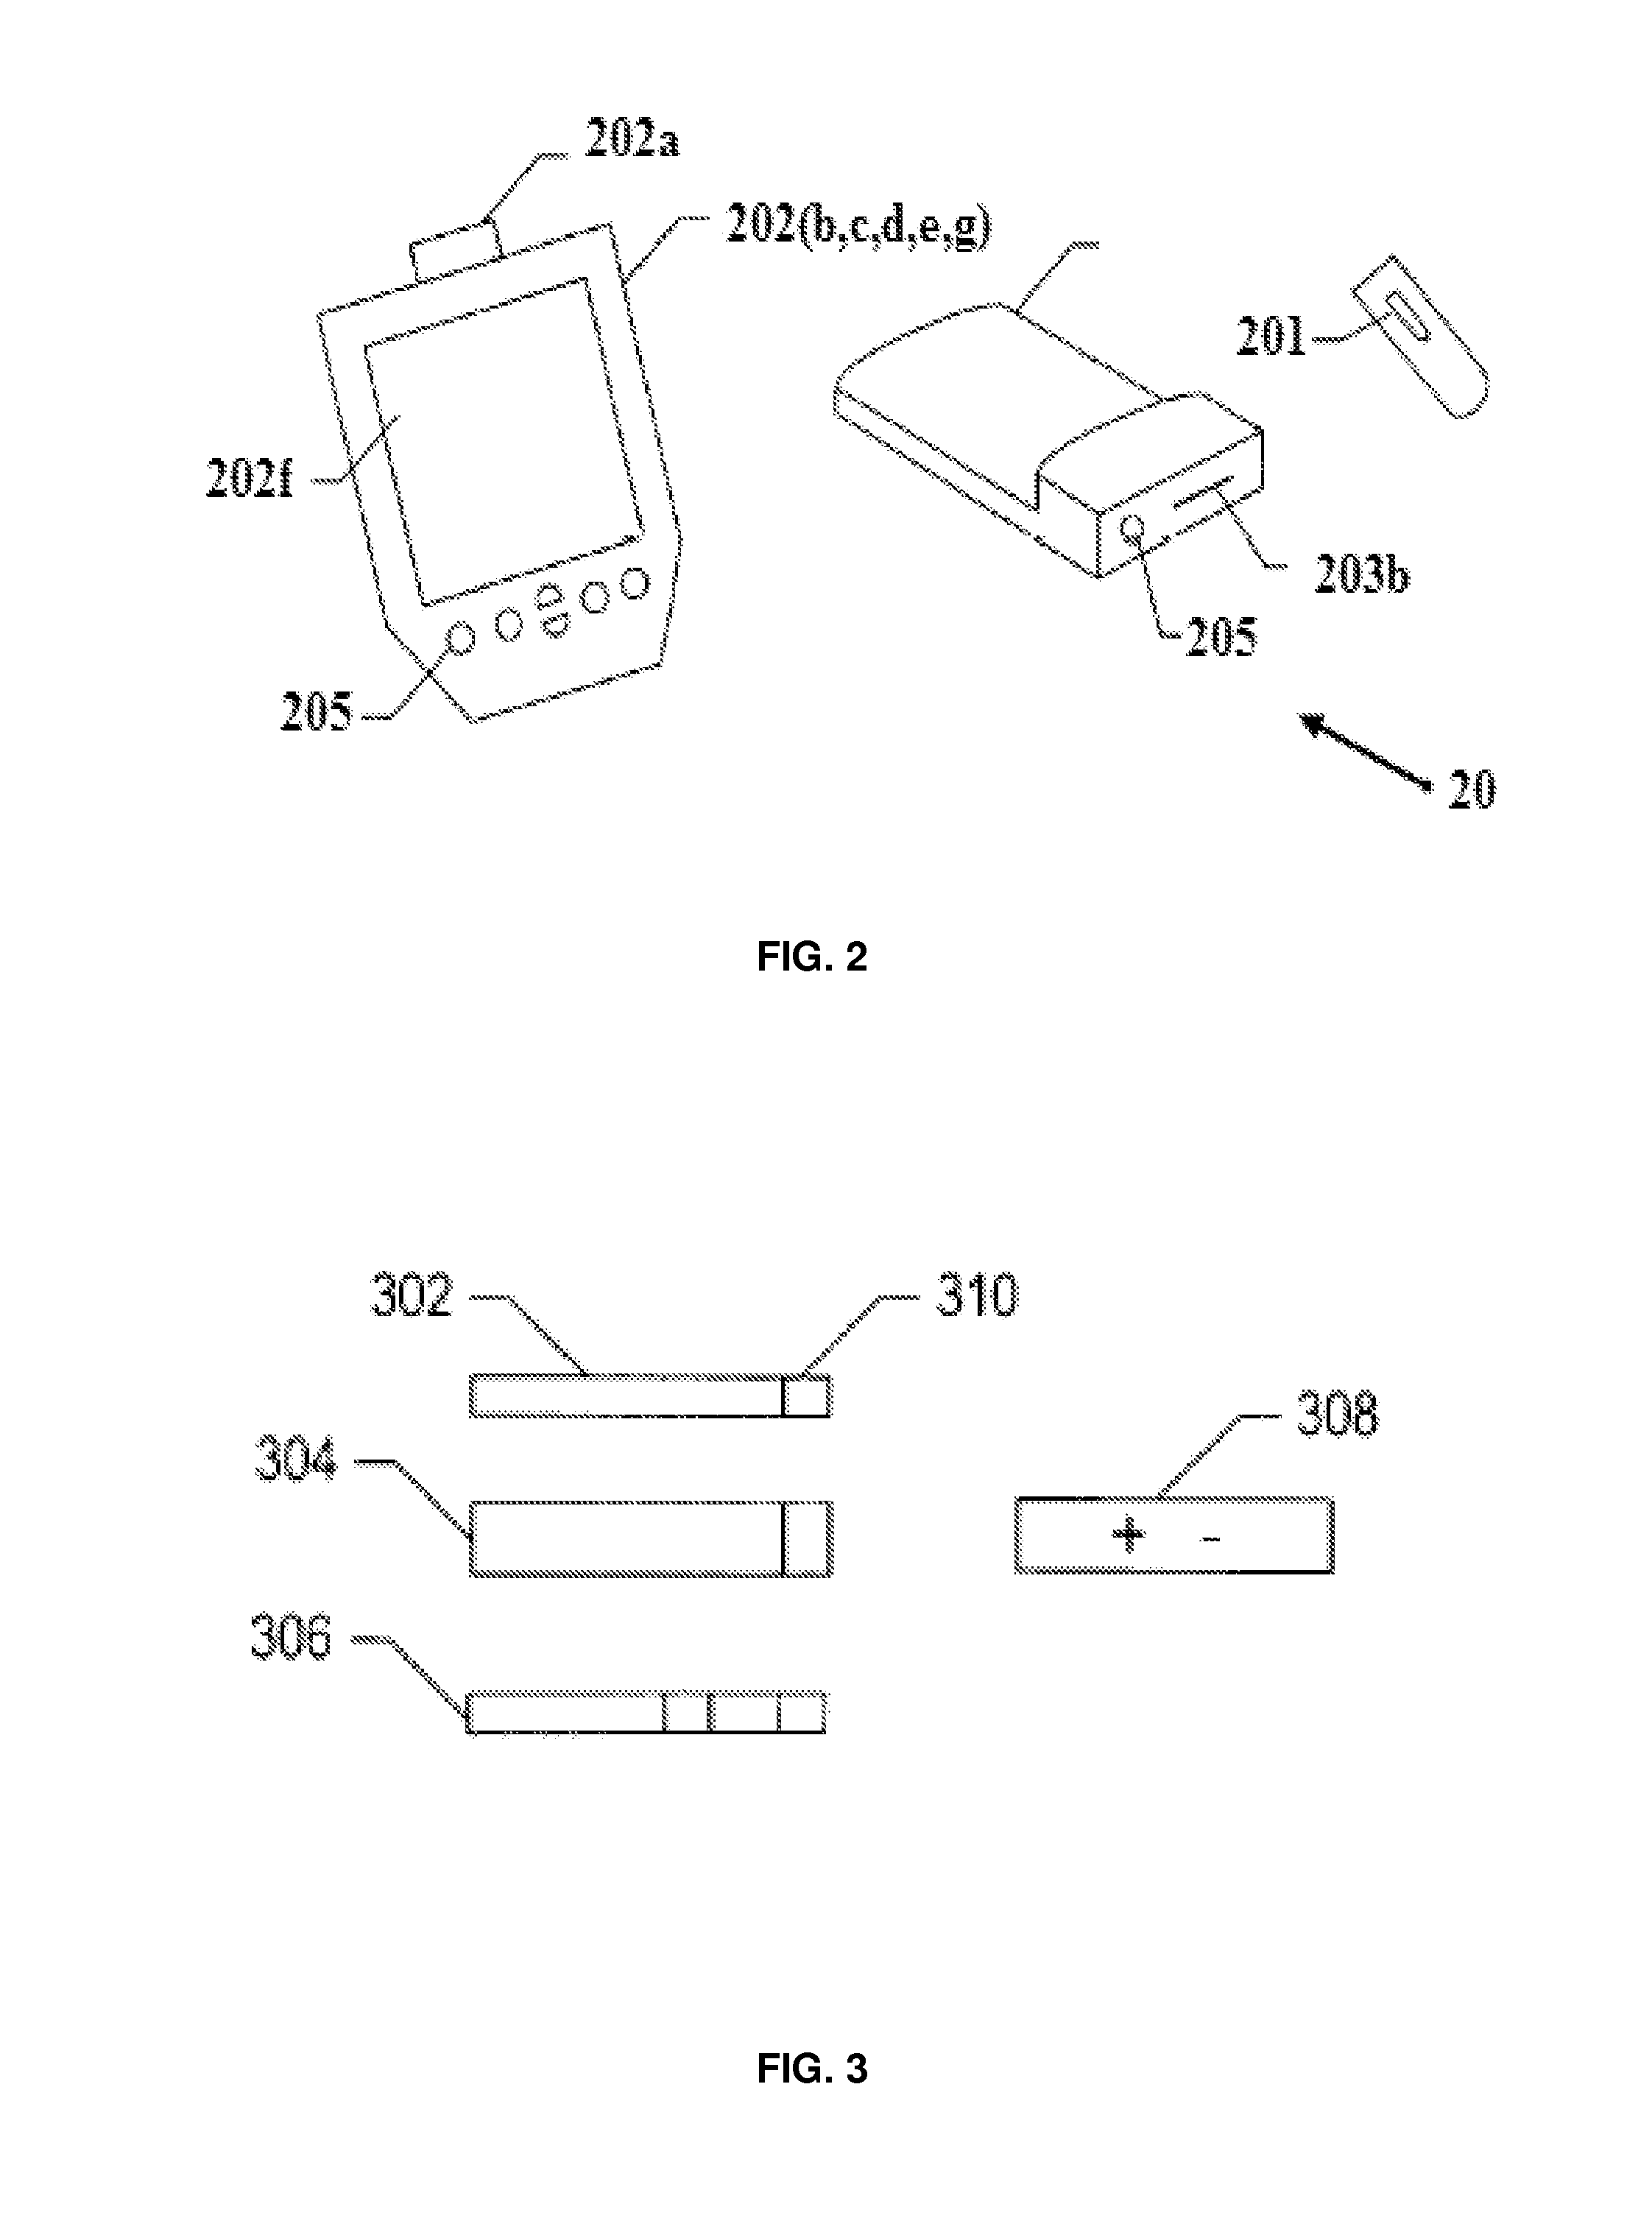 Portable testing system for detecting selected drugs or compounds in noncontrolled environments